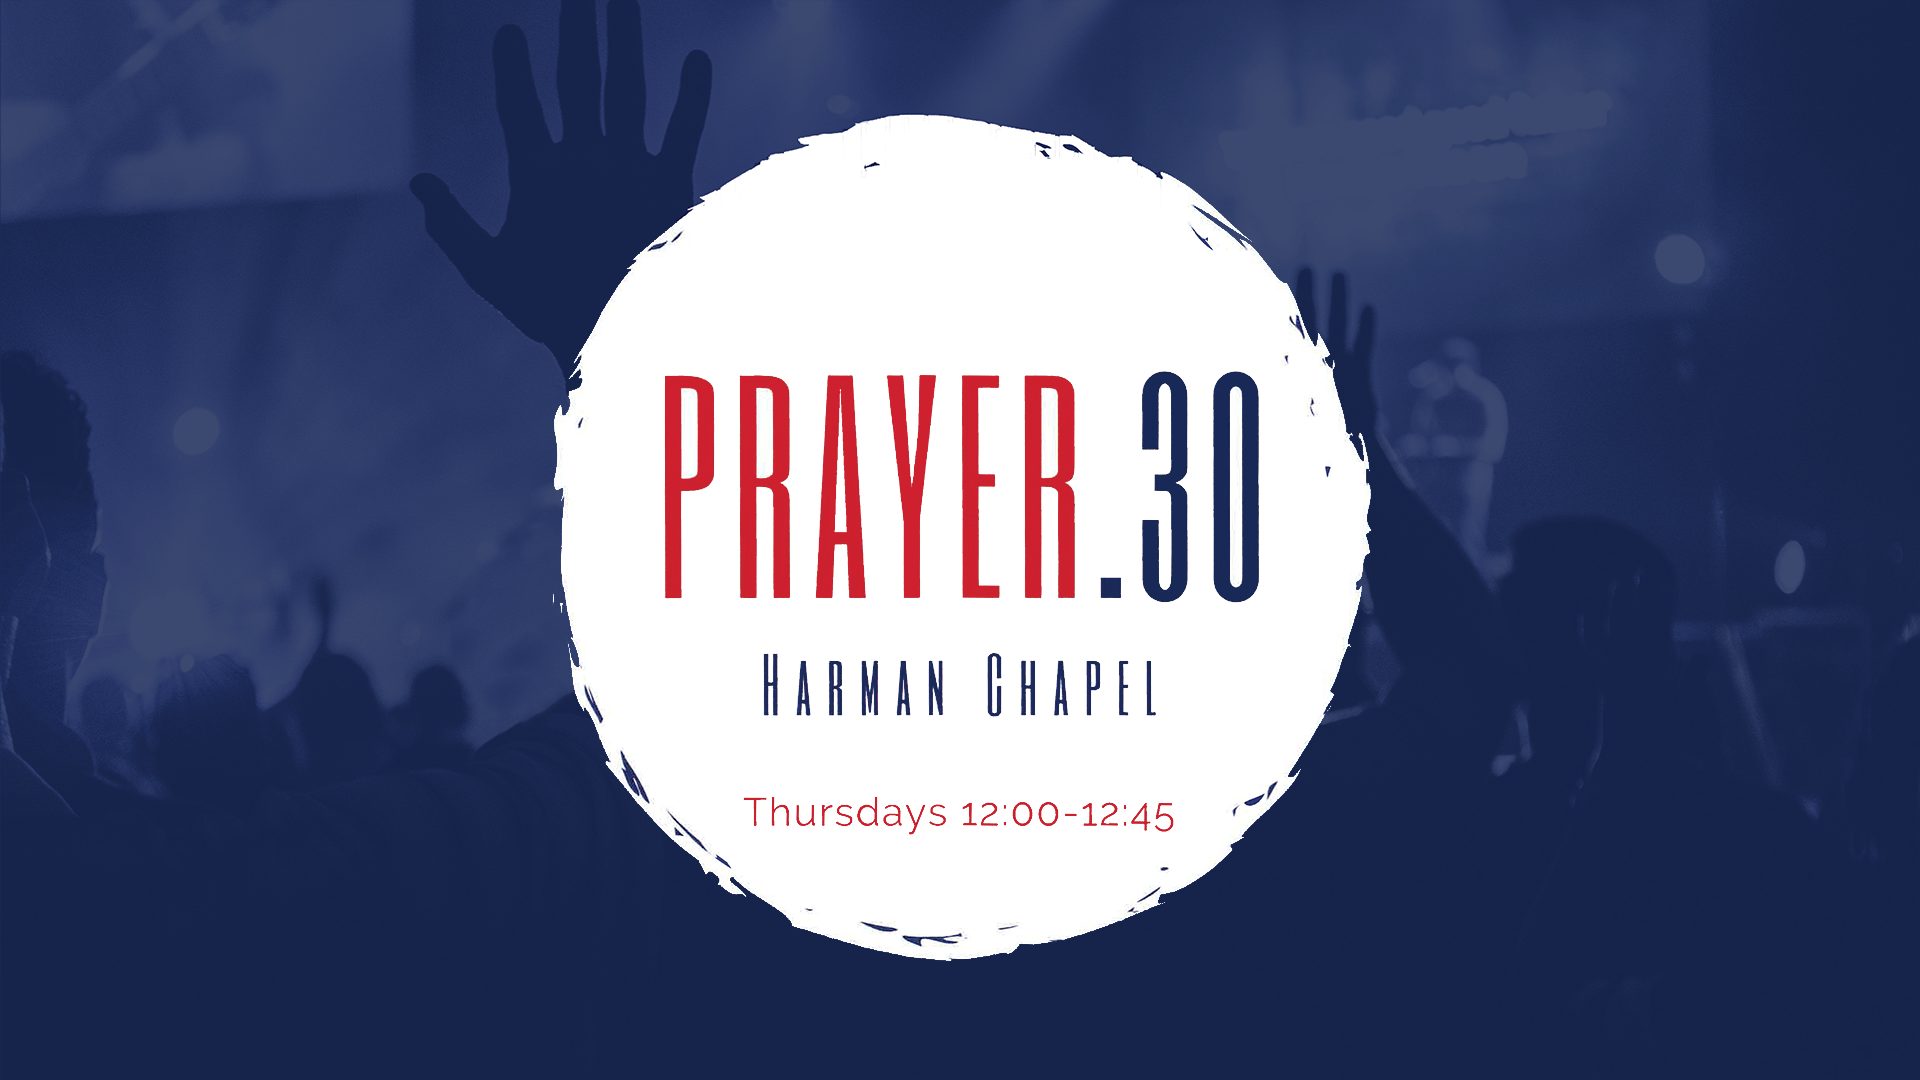 Prayer.30 - Held in Harman Chapel every Thursday from 12:00pm - 12:45pm.